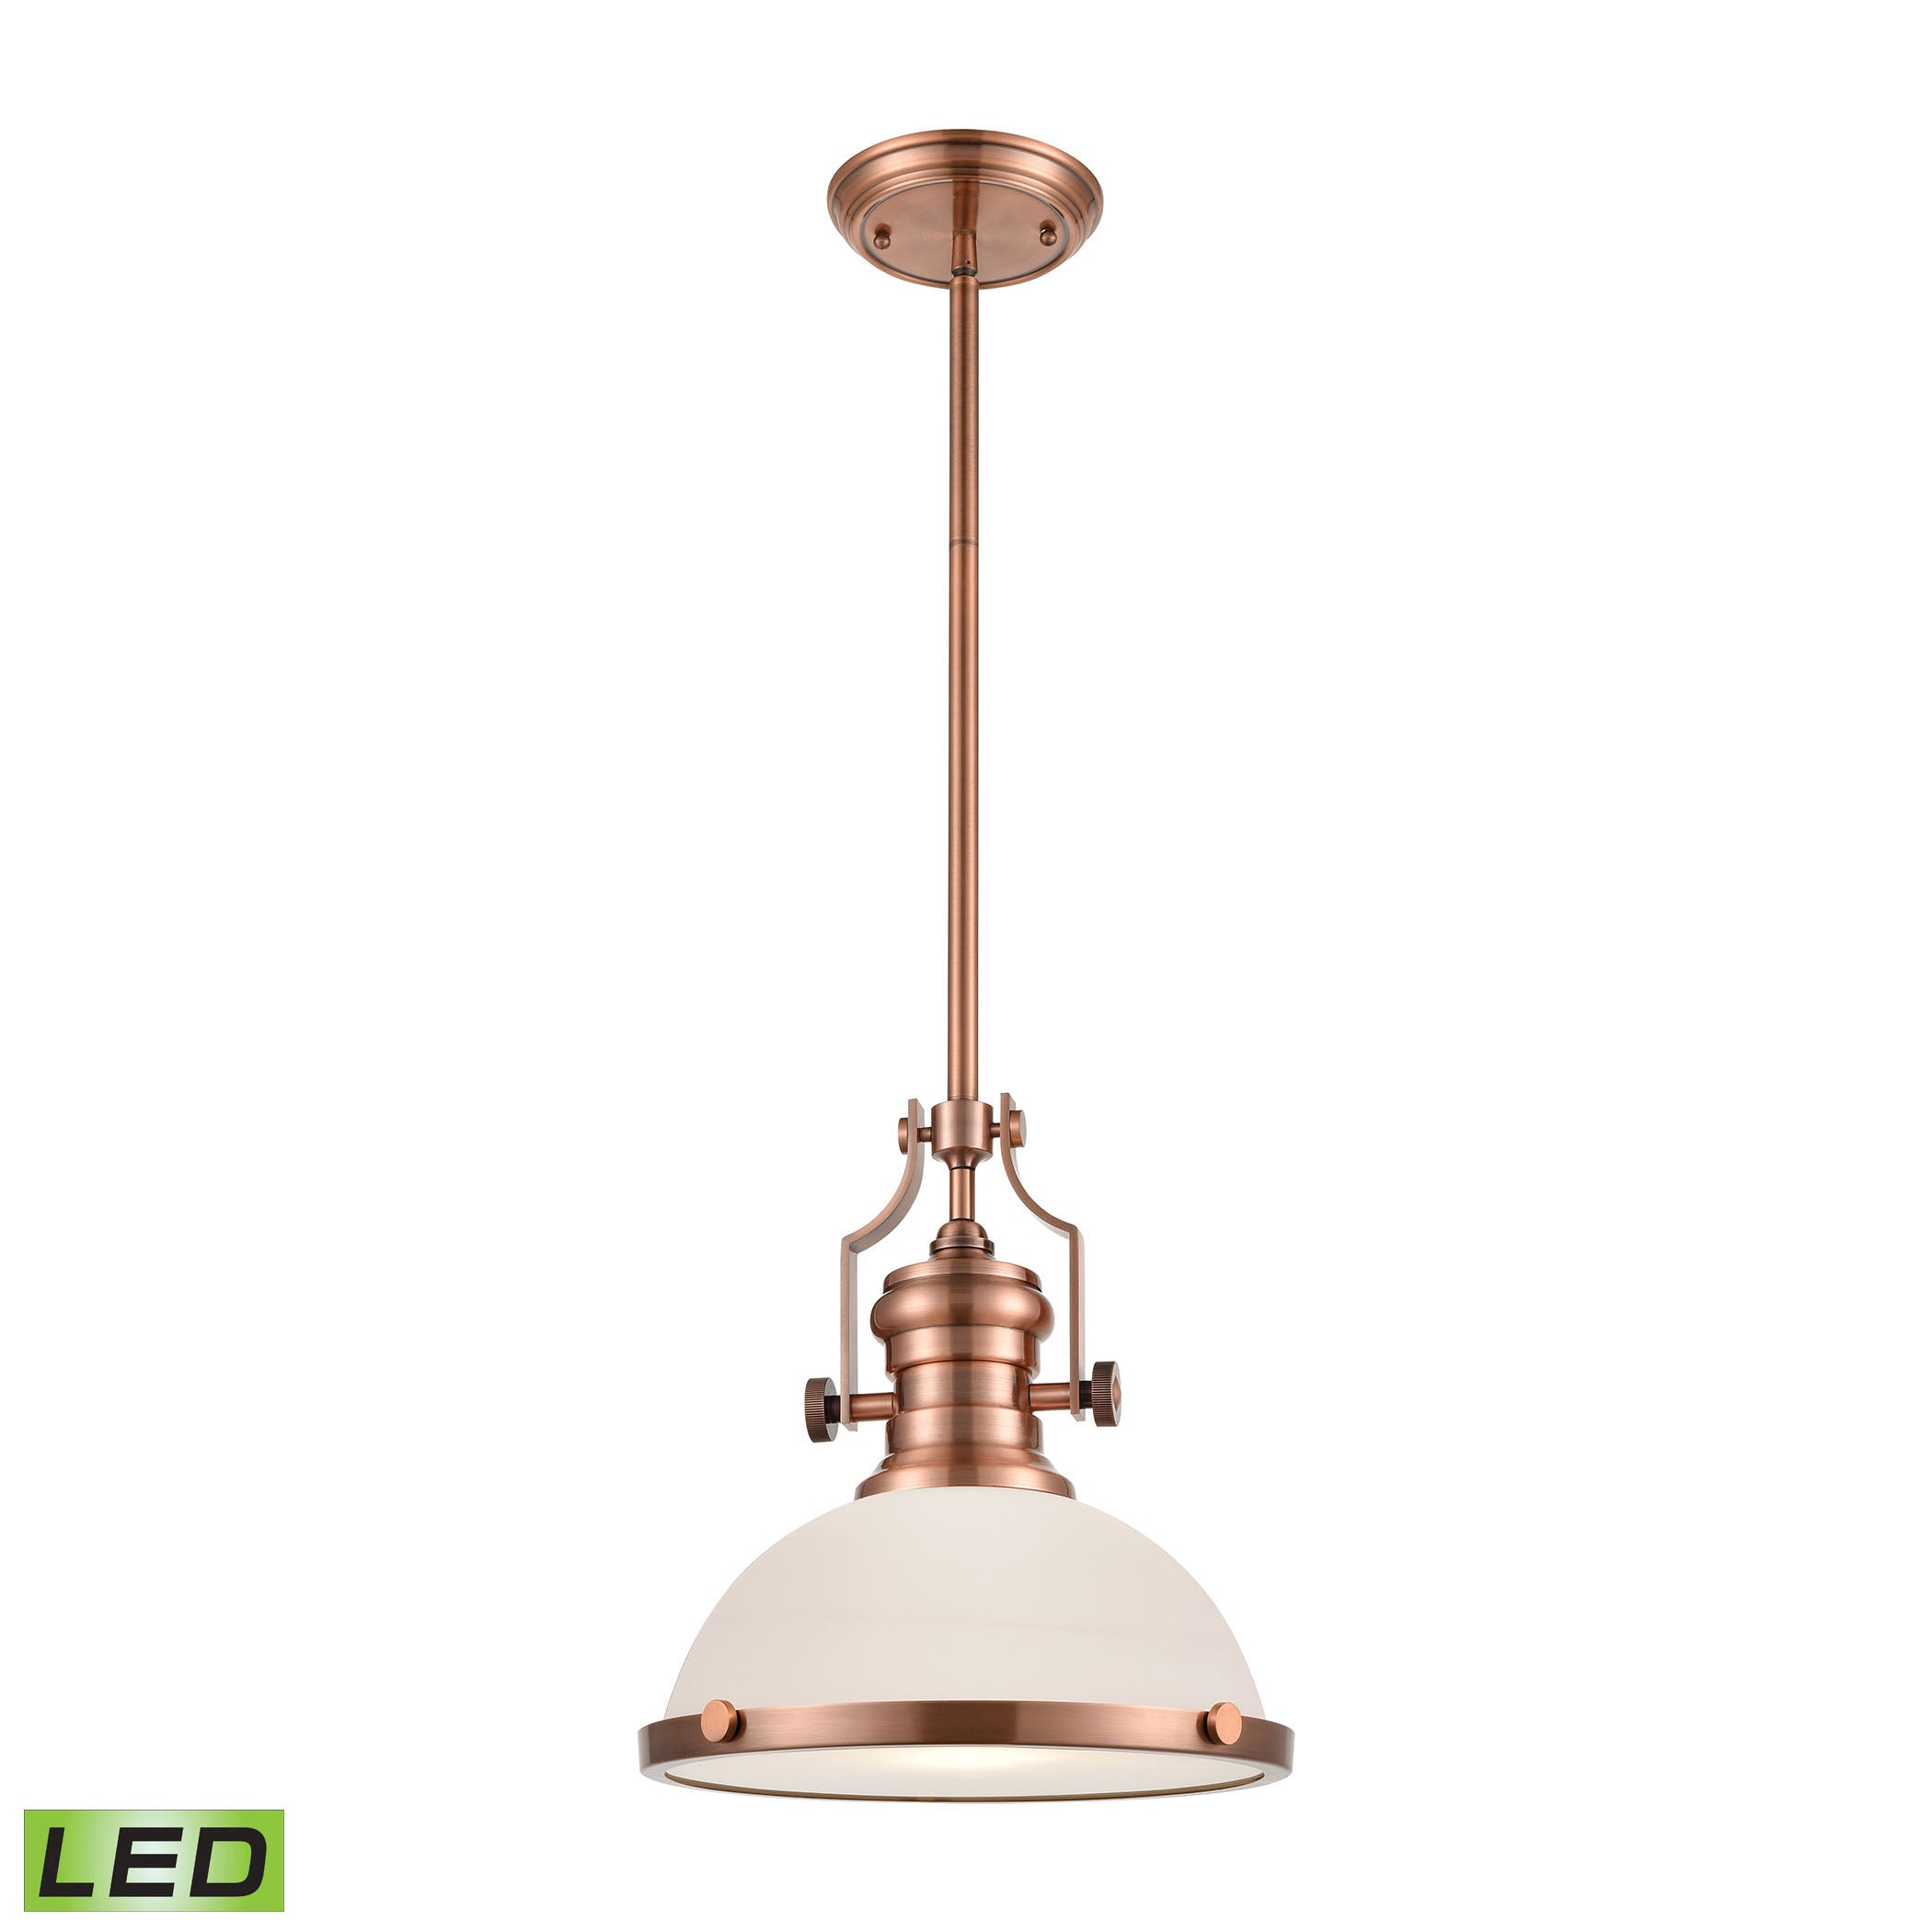 ELK Lighting 66143-1-LED Chadwick 1-Light Pendant in Antique Copper with White Glass - Includes LED Bulb